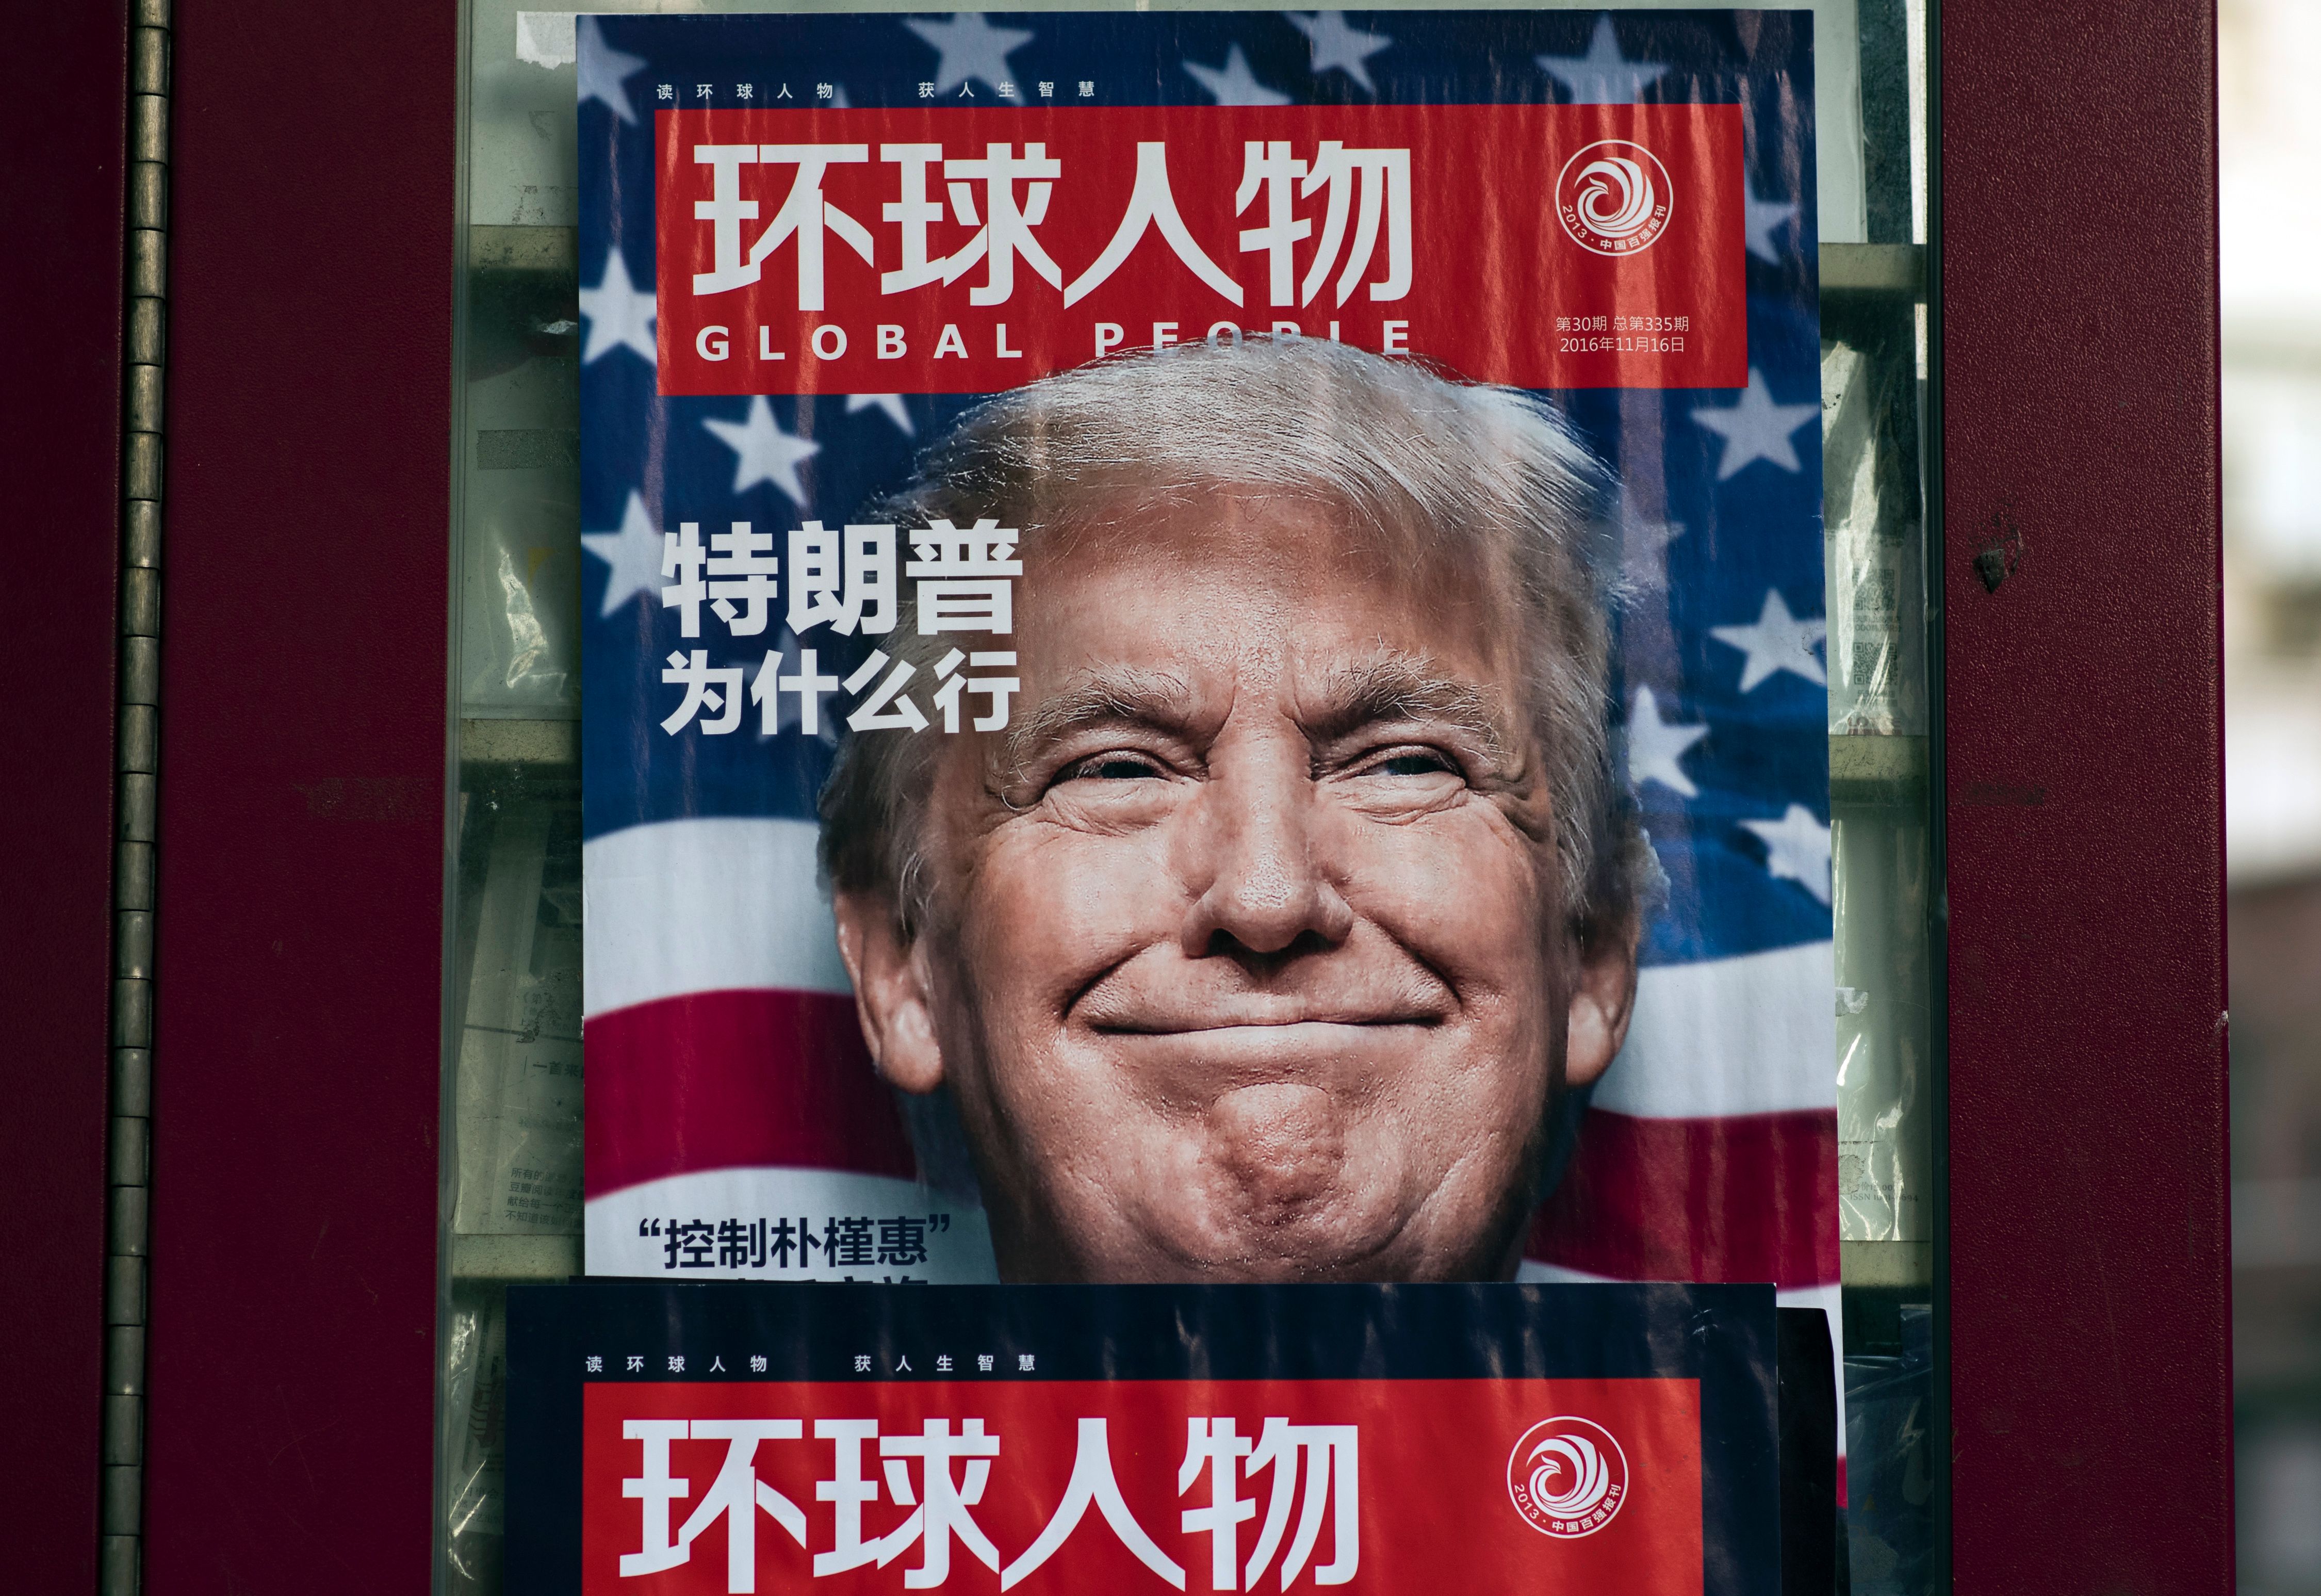 An advertisement for a magazine featuring U.S. President-elect Donald Trump on the cover at a news stand in Shanghai on December 14, 2016. (Johannes Eisele—AFP/Getty Images)